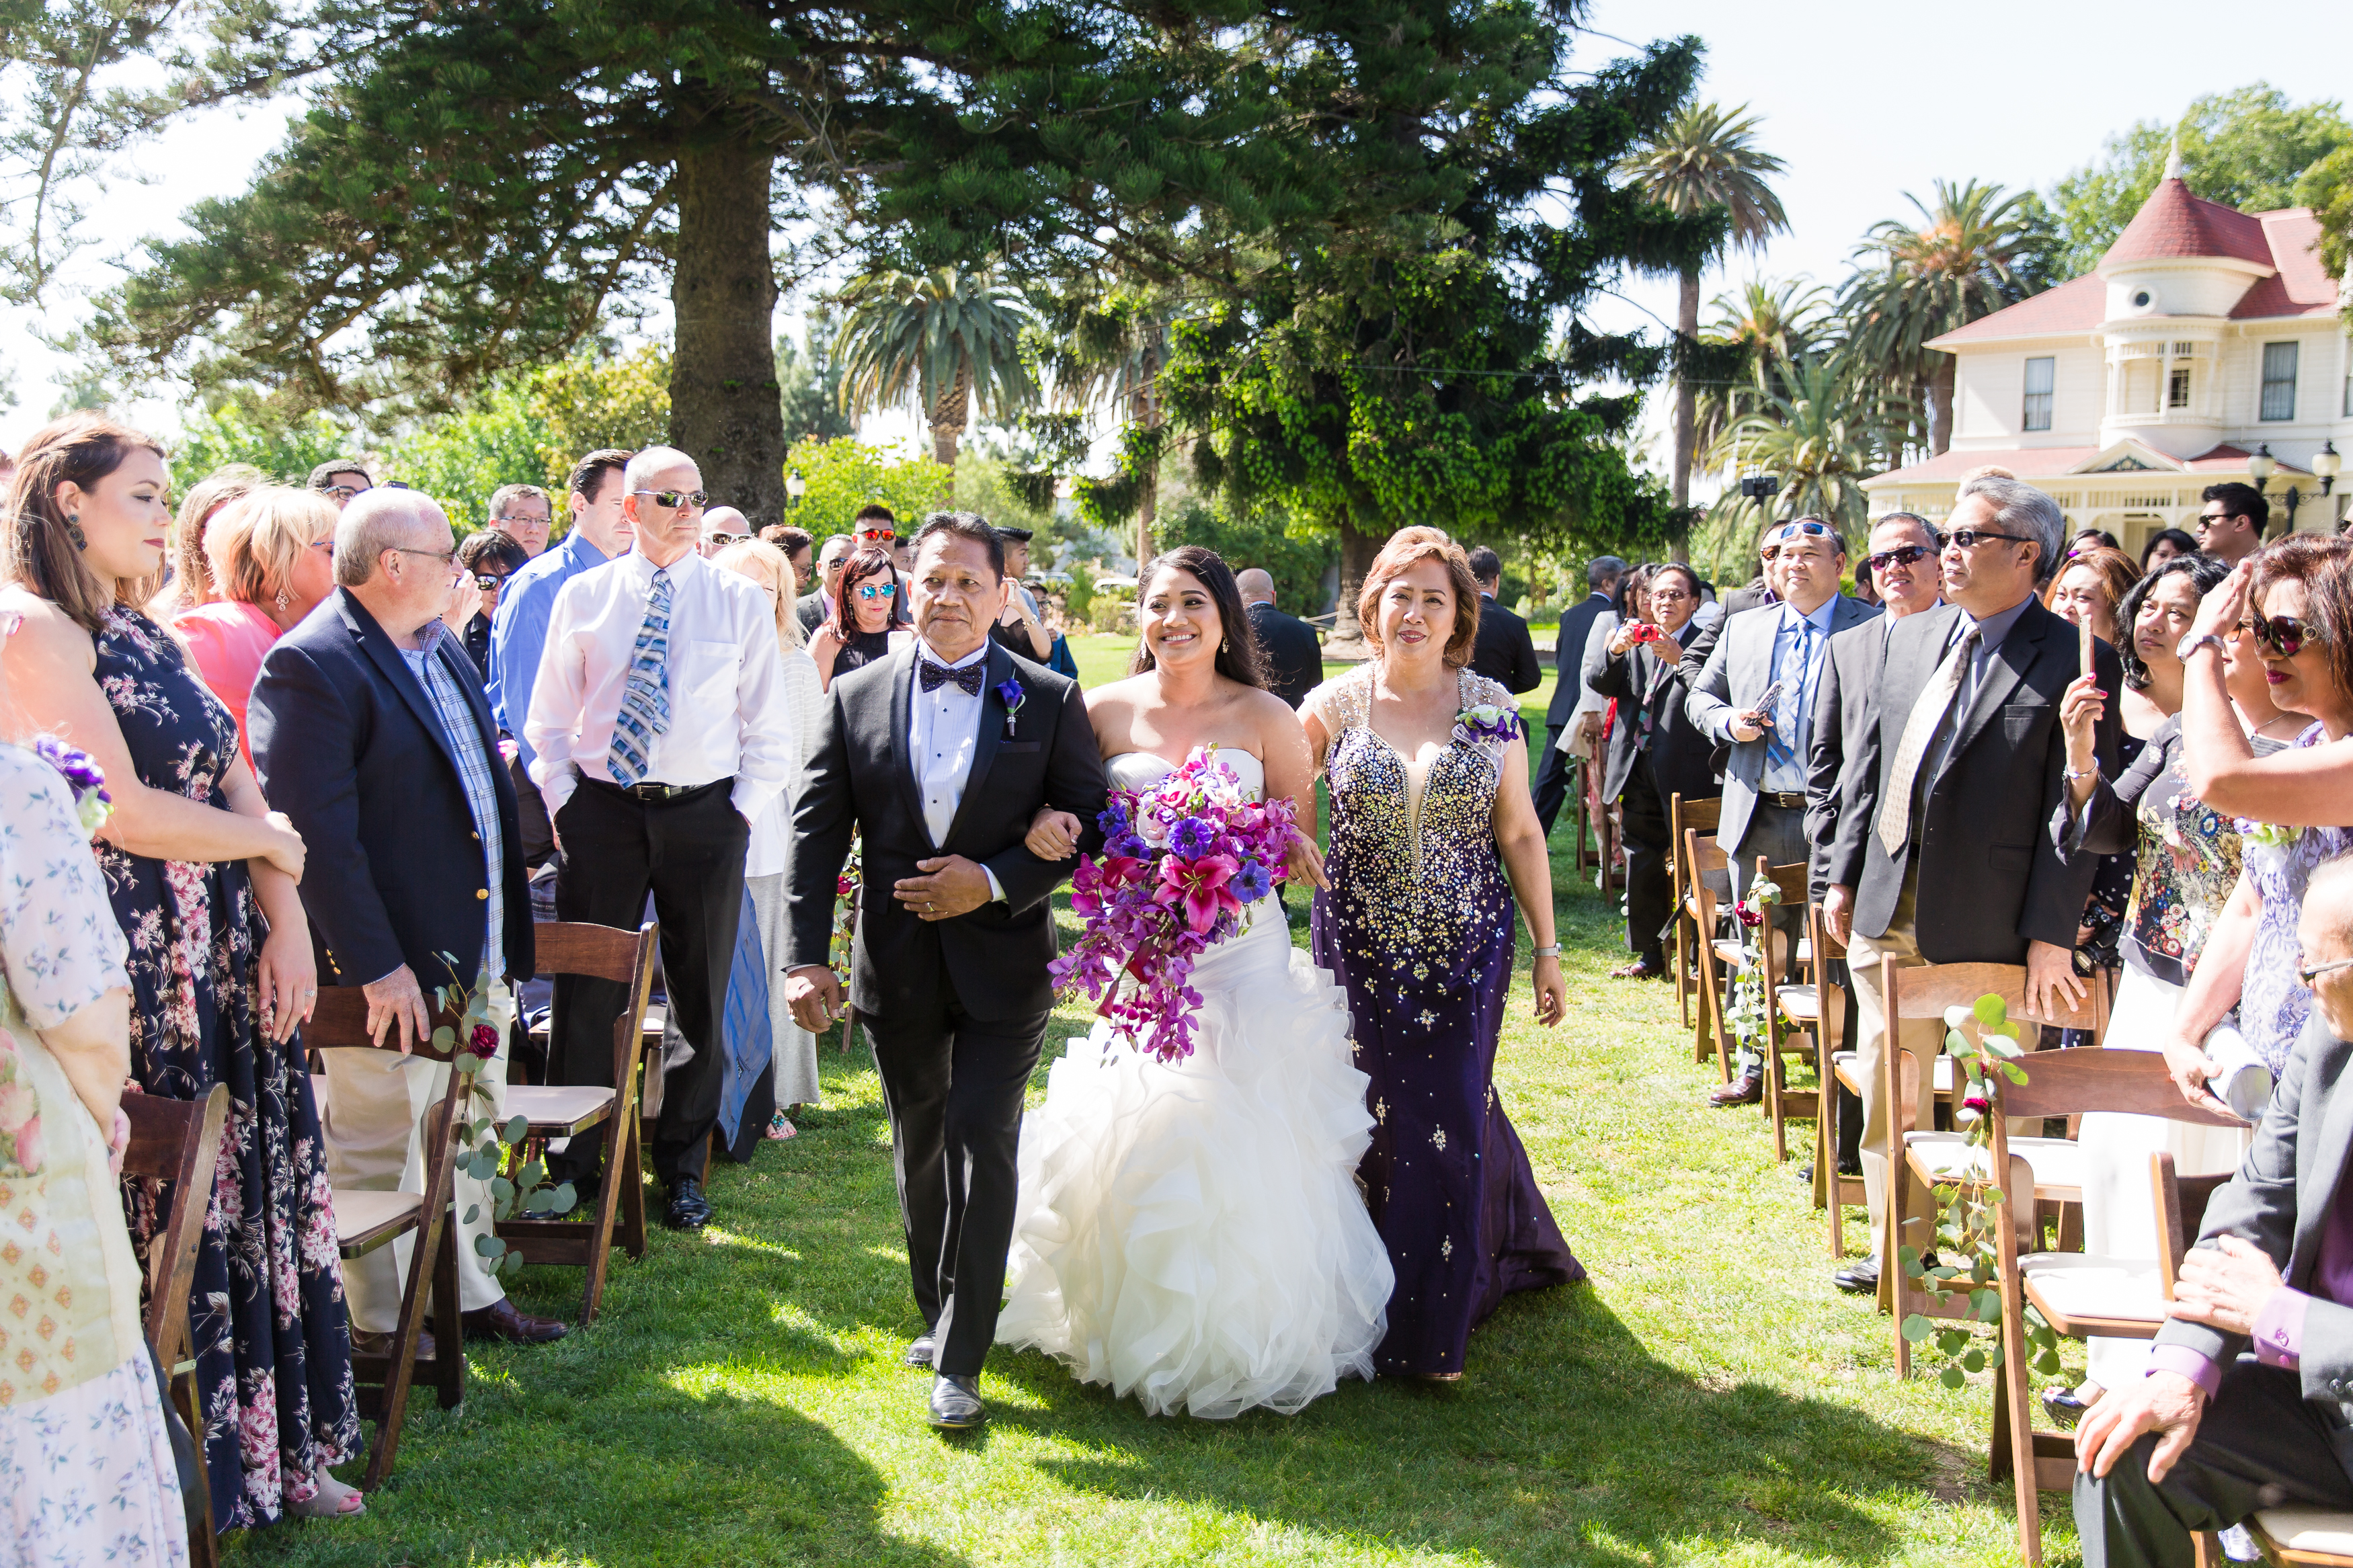 Bride's parents walk her down the aisle of outdoor ceremony